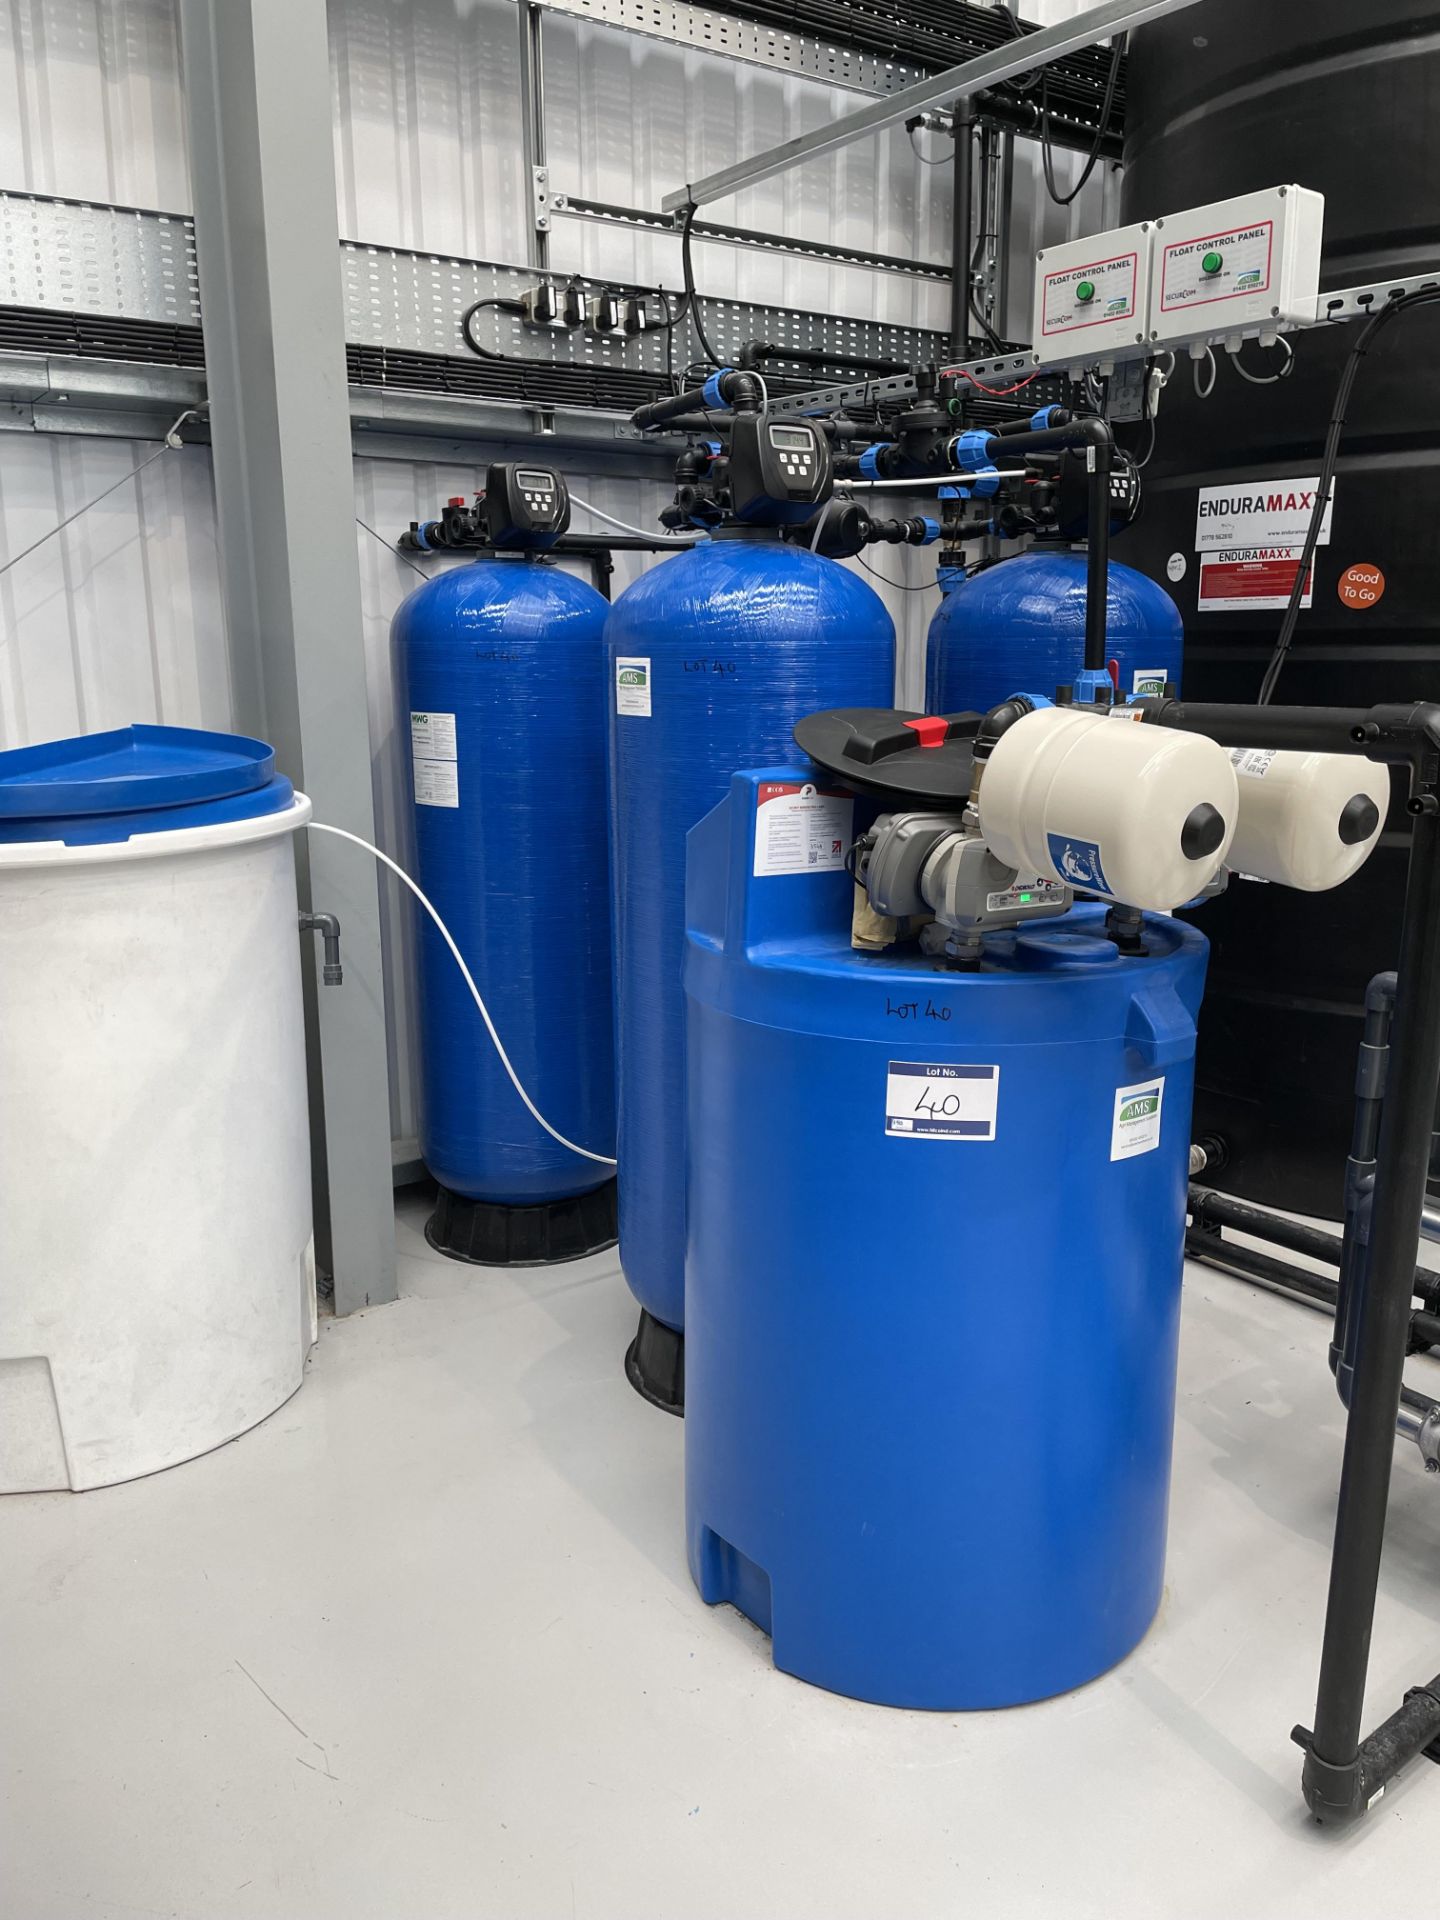 4 Stage Water Softening and Treatment Plant Together With All Associated Equipment